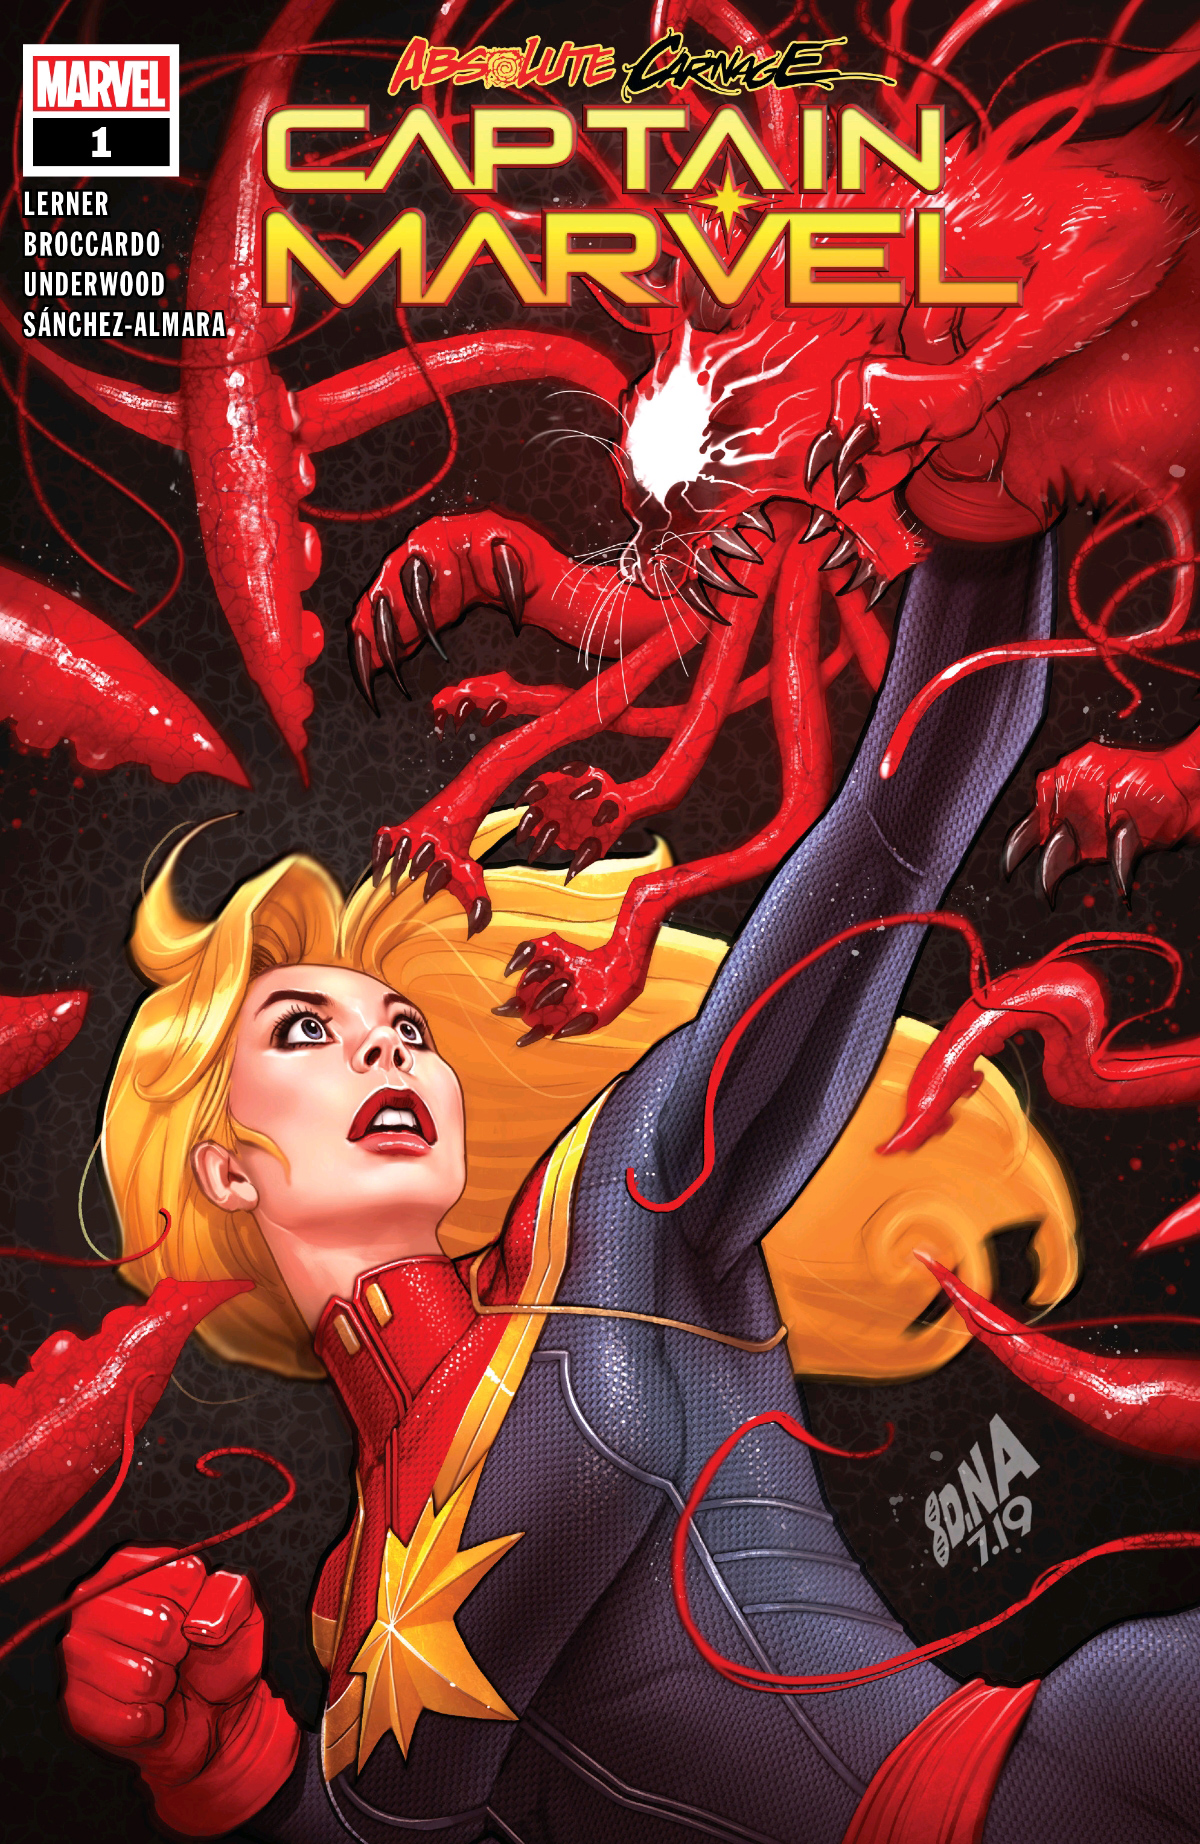 Read online Absolute Carnage: Captain Marvel comic -  Issue # Full - 1